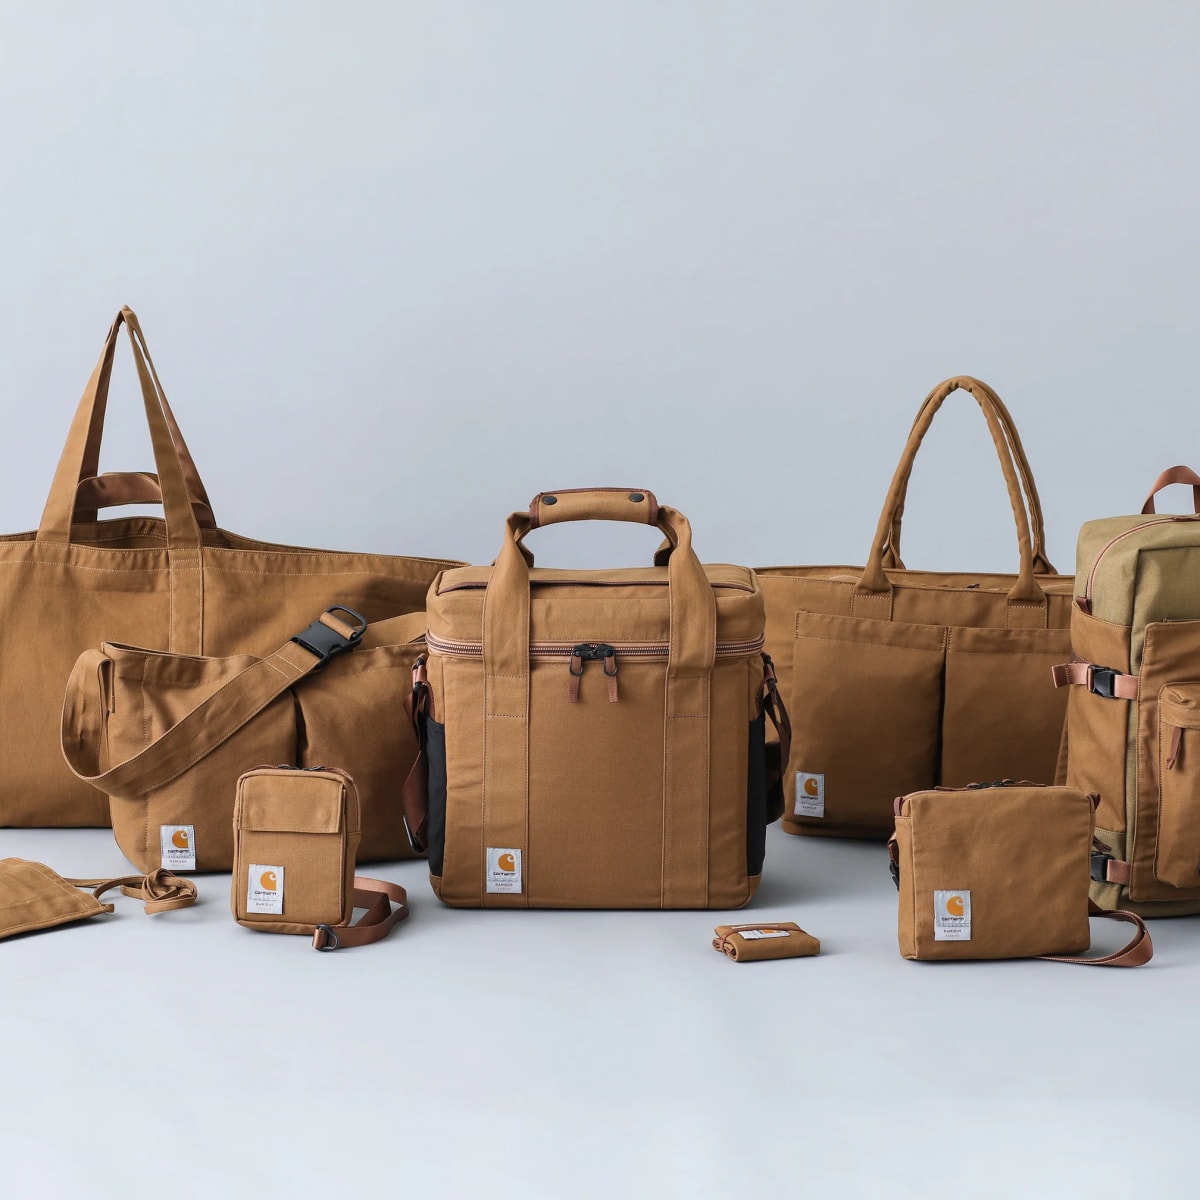 Carhartt WIP launches a new bag collection with Ramidus - Acquire